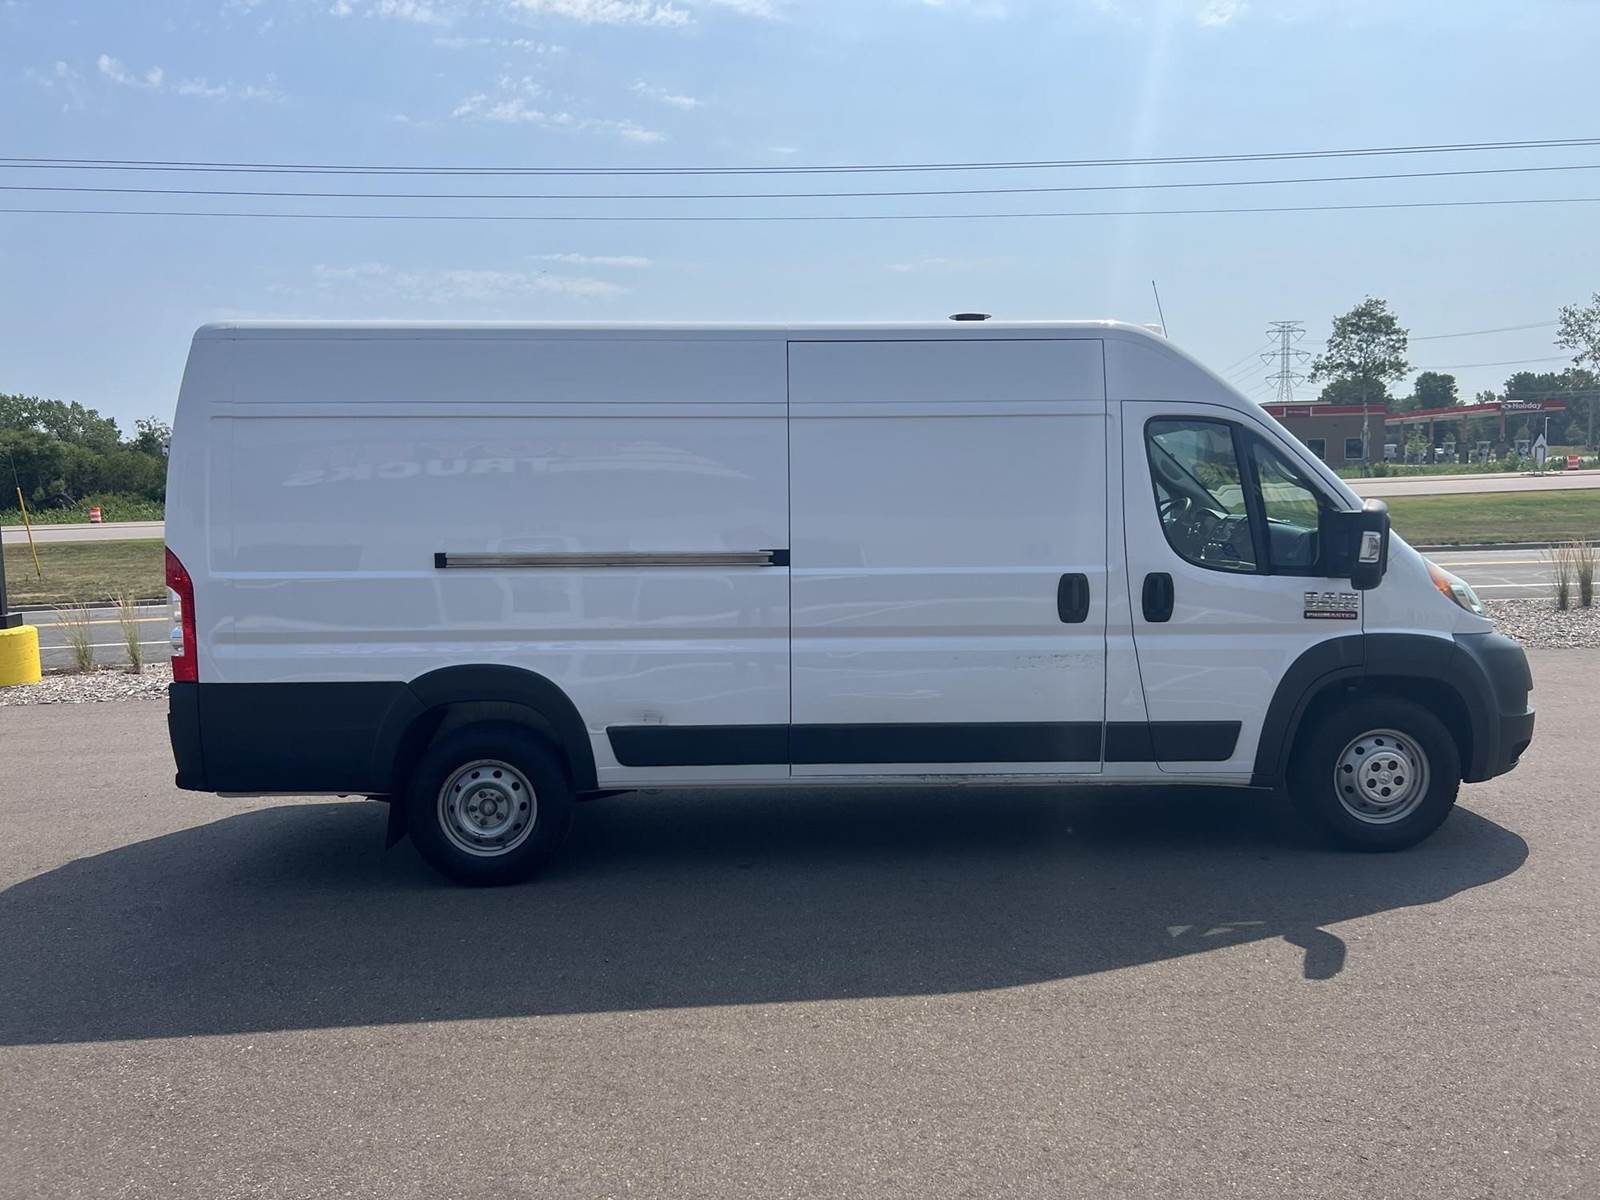 2017 RAM ProMaster 3500 Refrigerated Truck - 280HP, 6 Speed Automatic For  Sale, 92,574 Miles | Savage, MN | 1U2242 | MyLittleSalesman.com